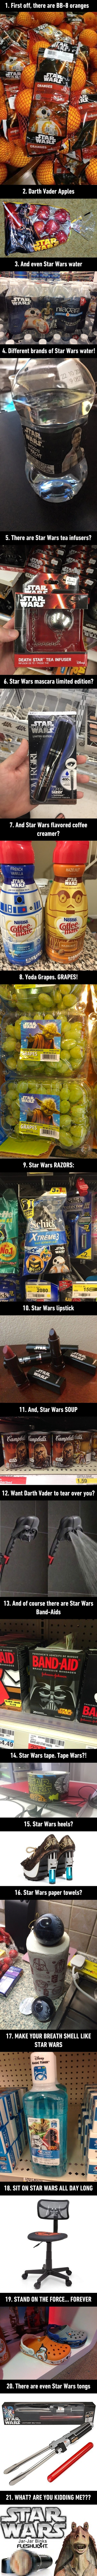 Star Wars Products